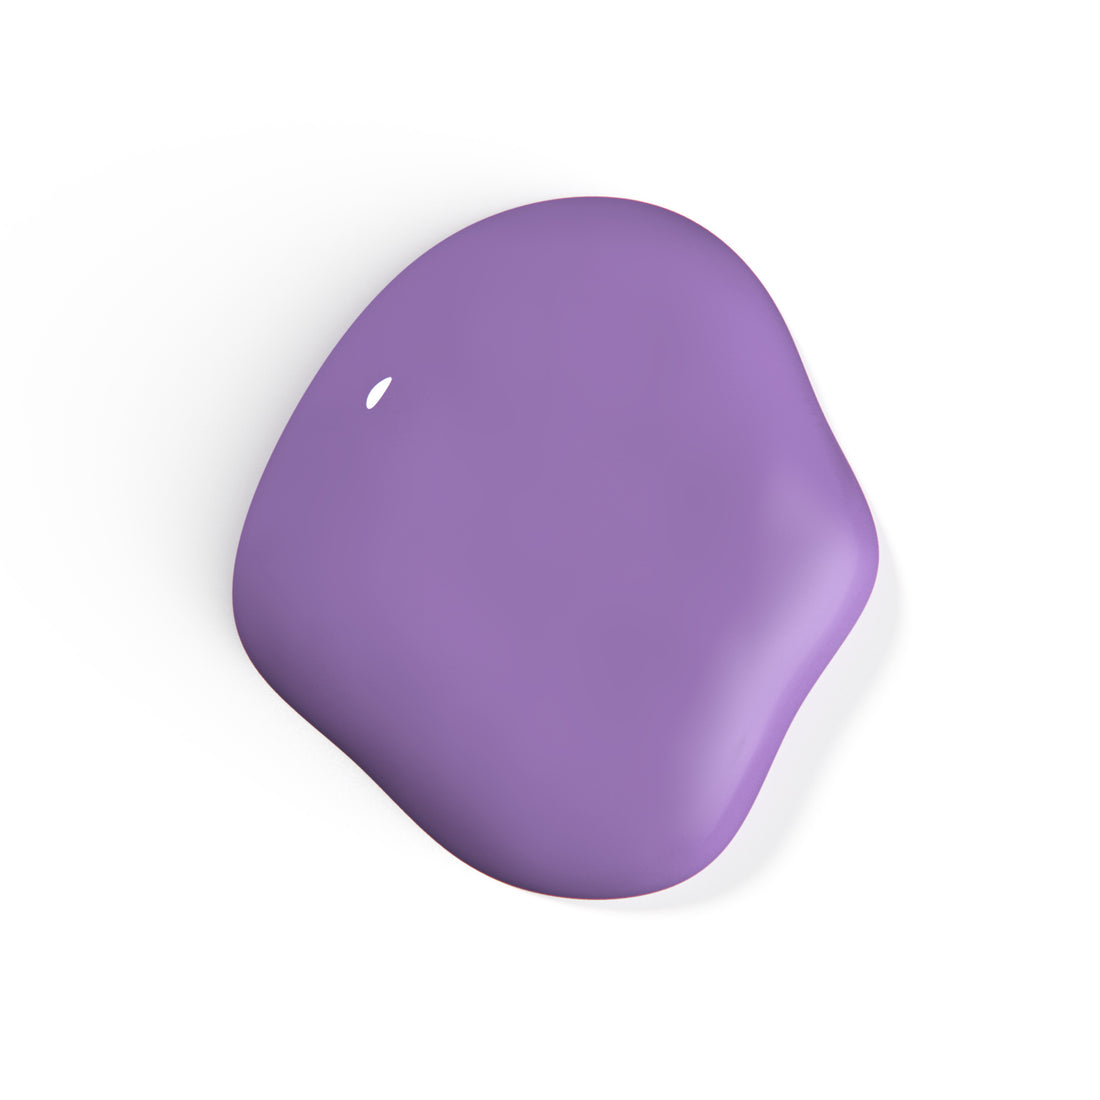 A droplet of Liberation Nails nail polish in a full-bodied purple color, 4th Dimension